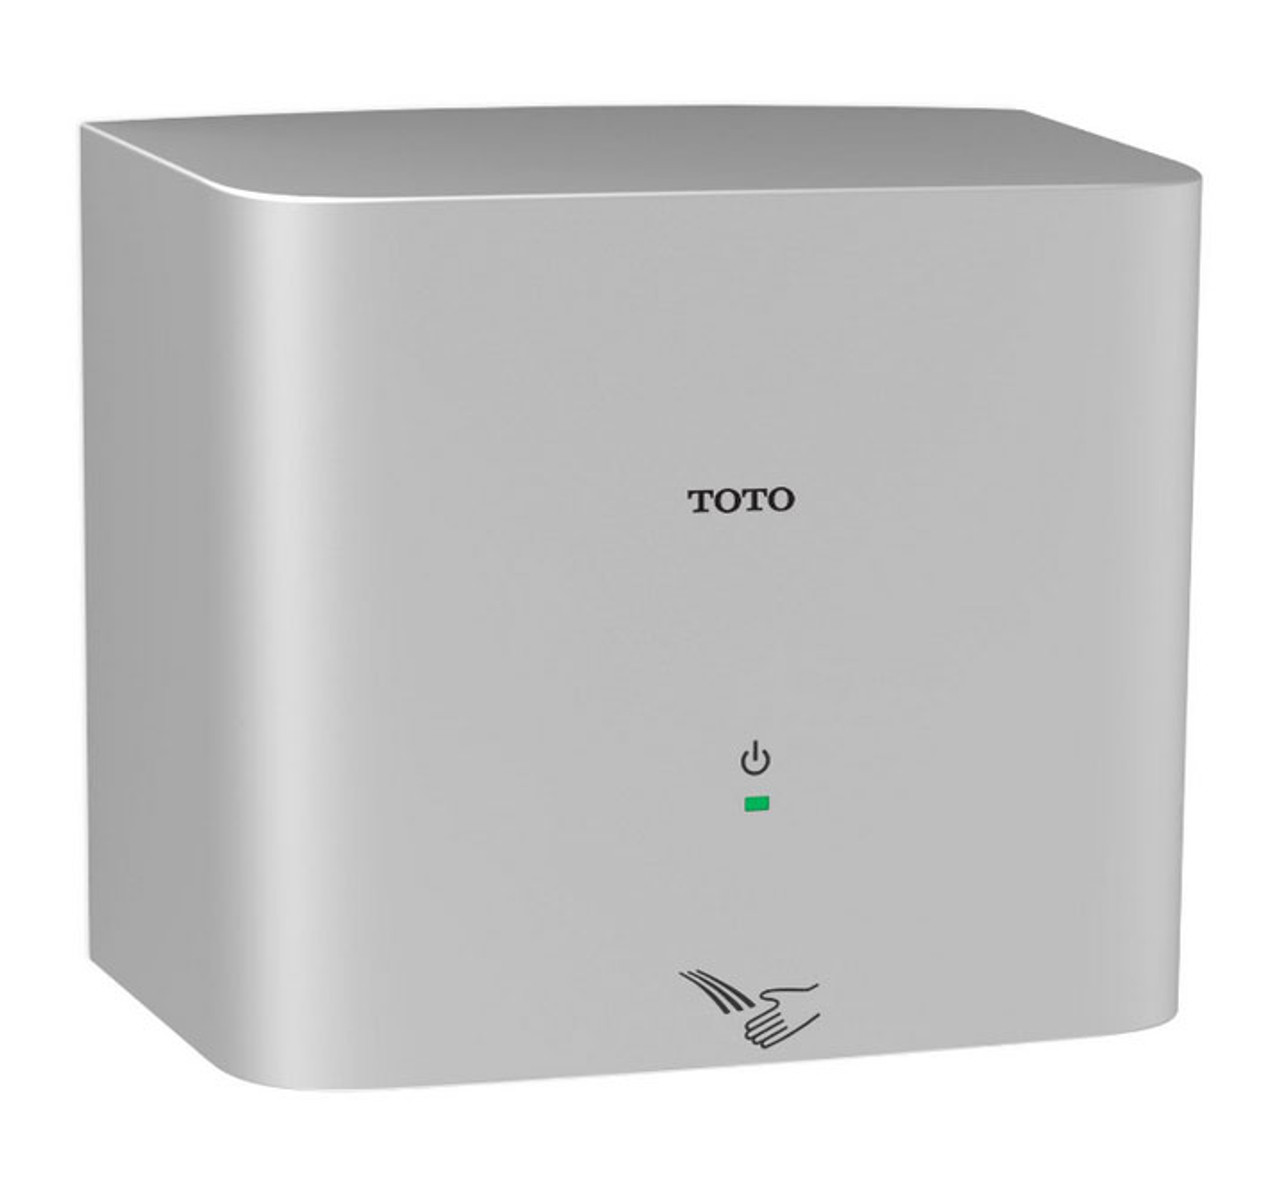 TOTO HDR130#SV High-Speed Hand Dryer | Hand Dryer Supply